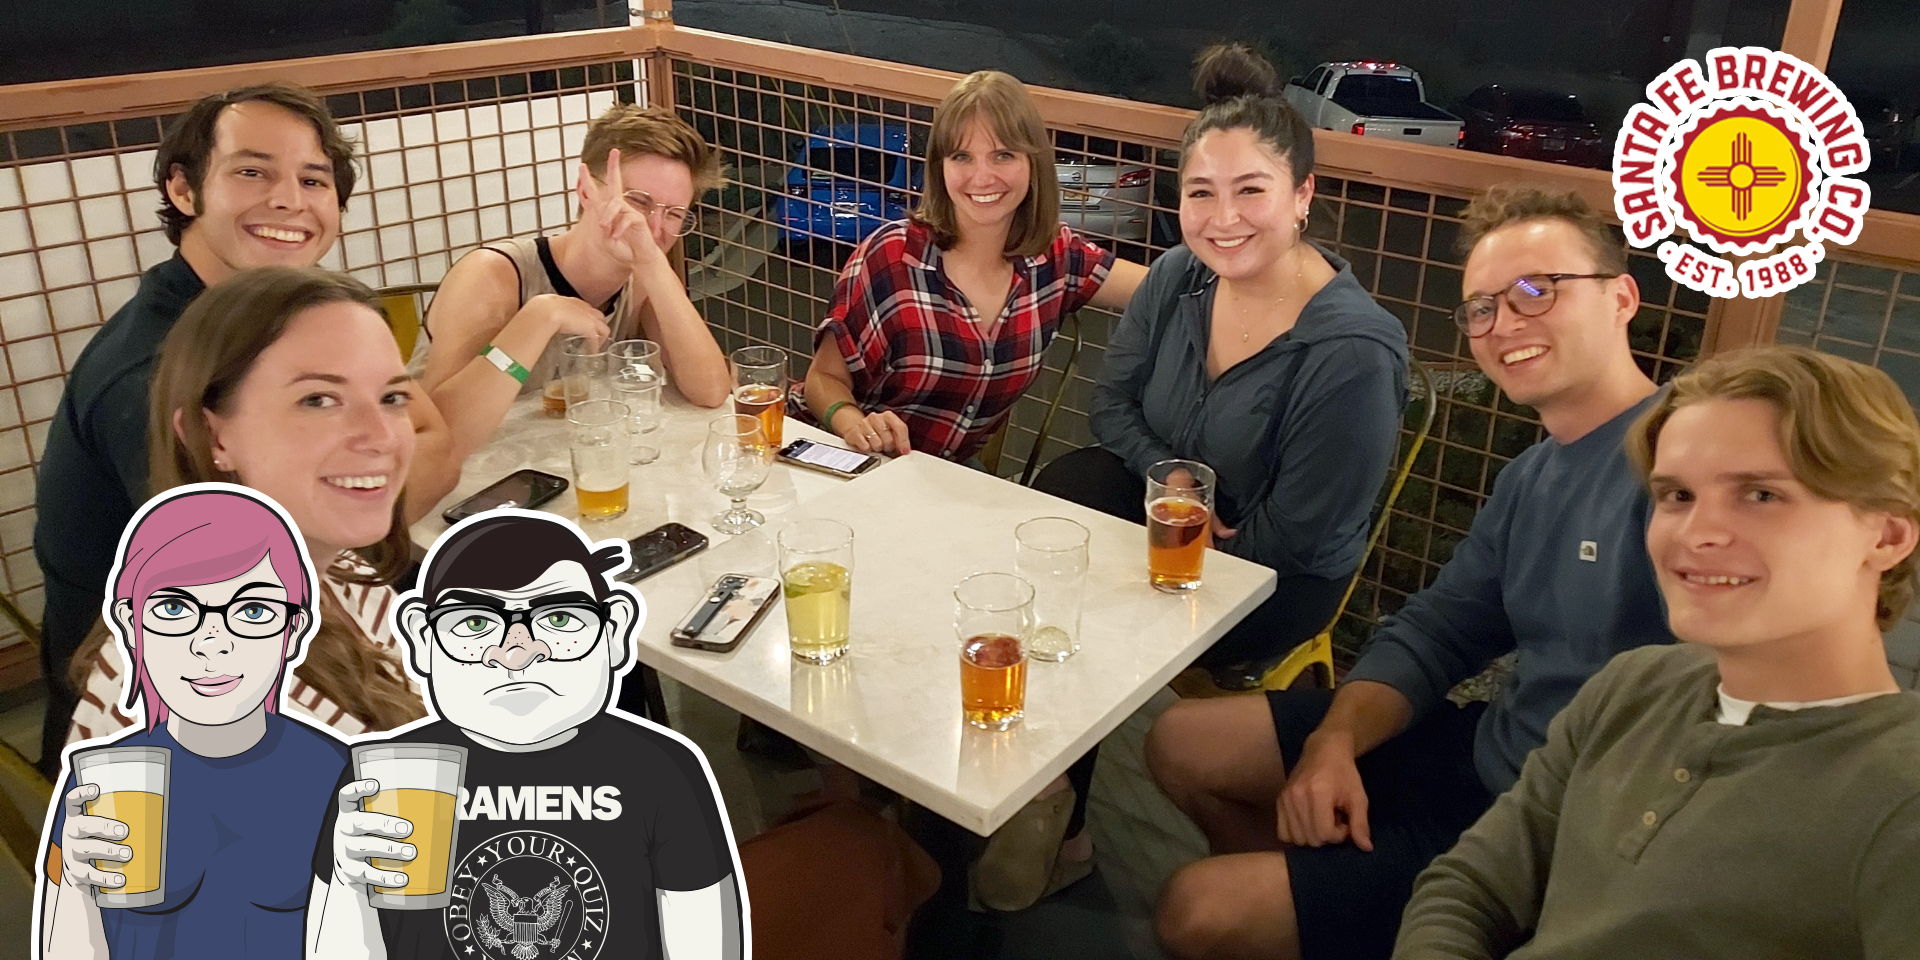 Geeks Who Drink Trivia Night at Santa Fe Brewing Company promotional image